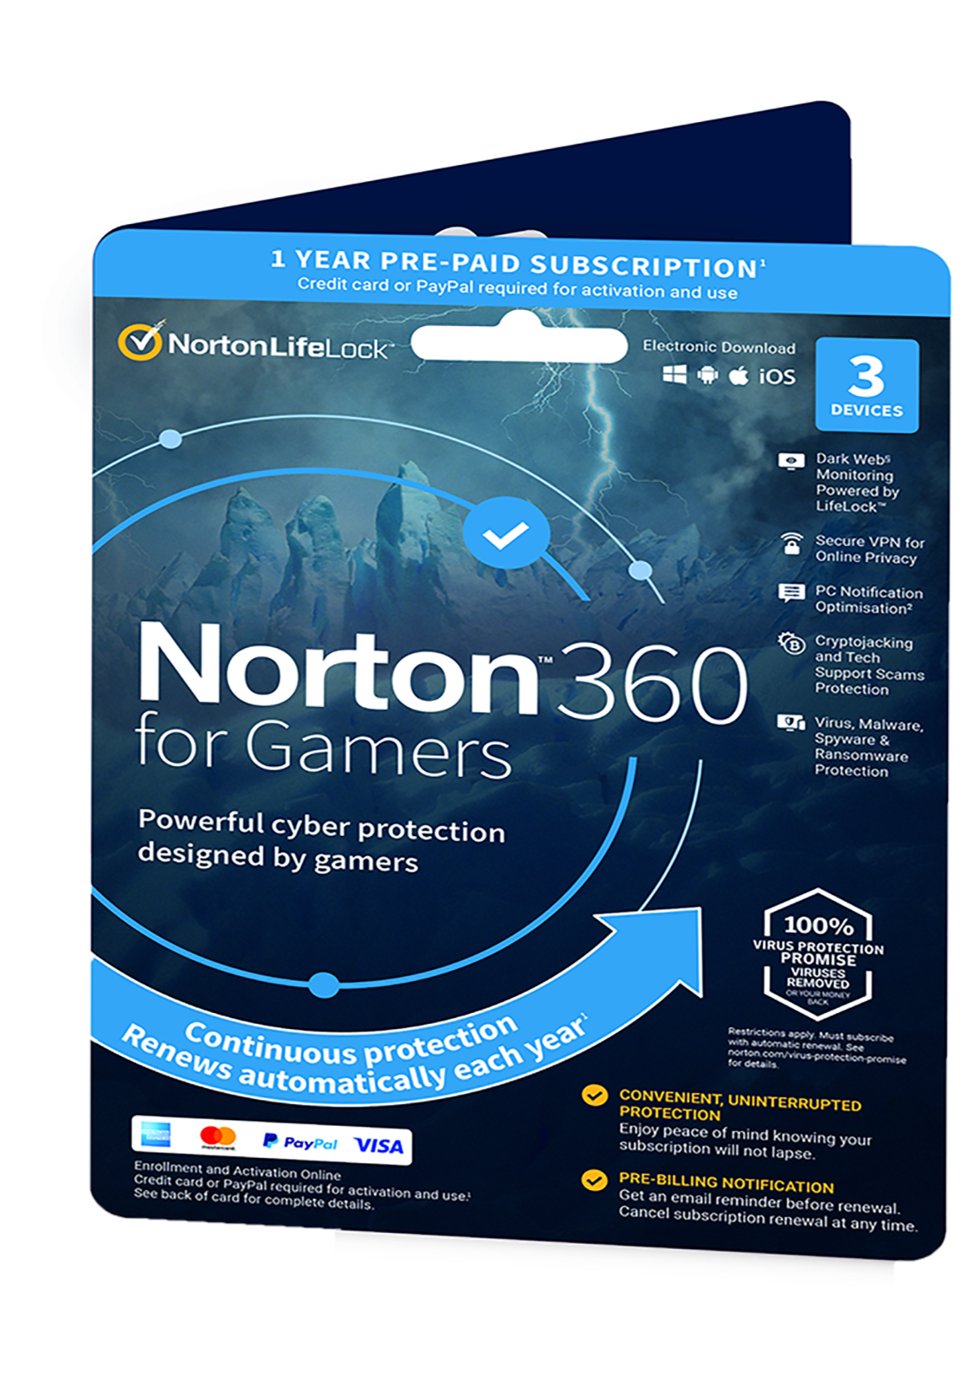 NORTON 360 Gamer - 3 Devices, 1 year auto-renew subscription